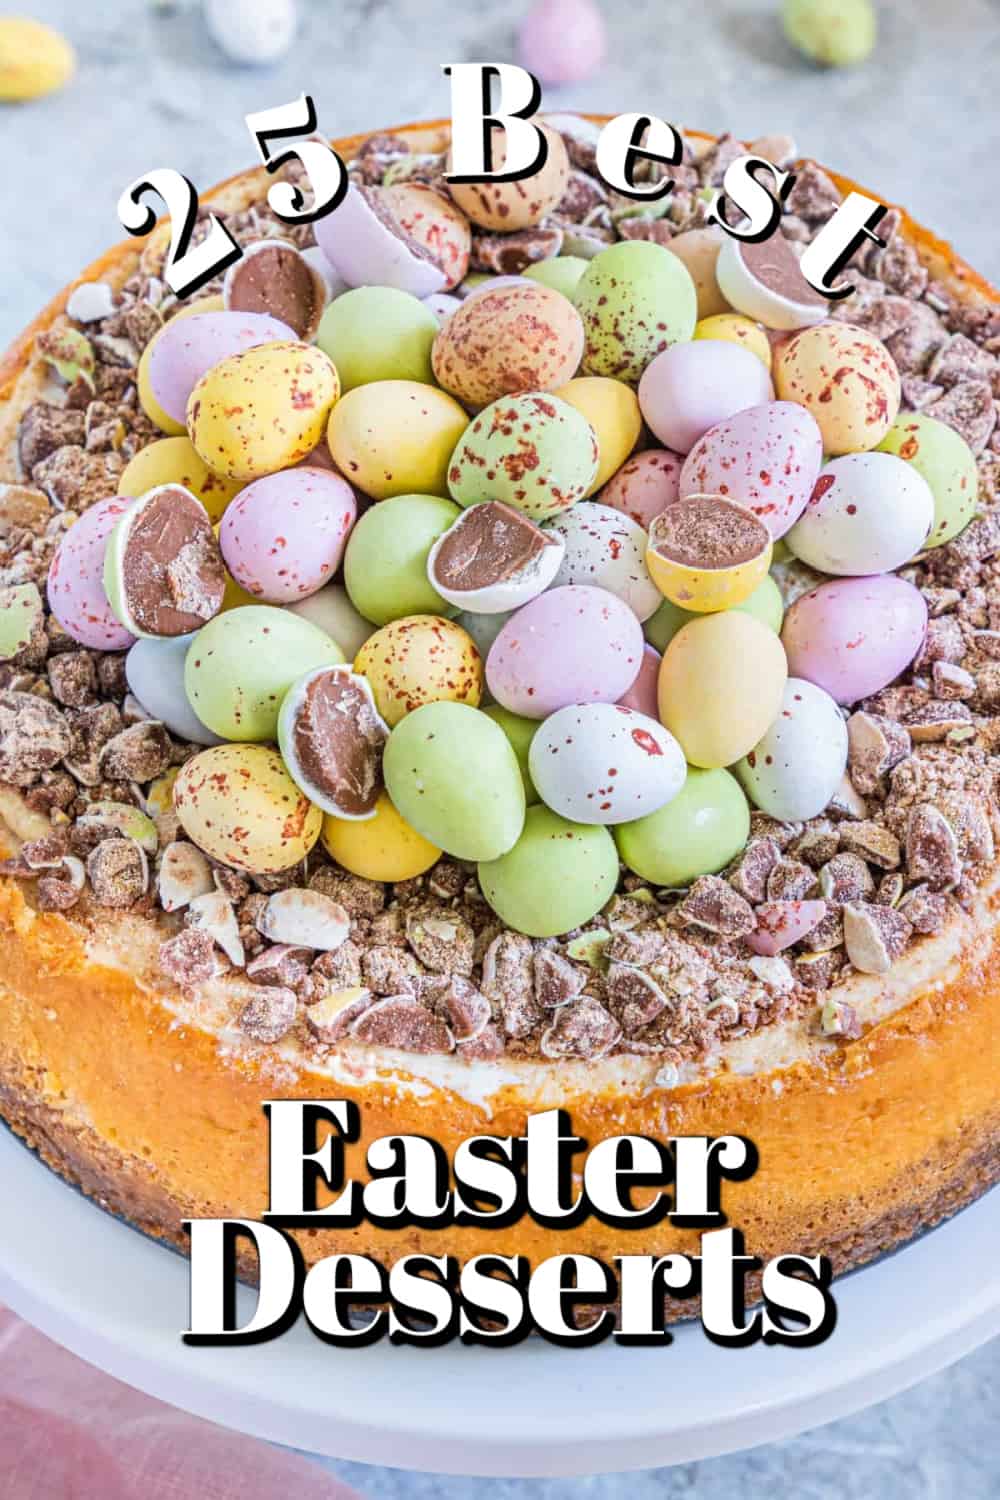 25 Best Easter Desserts Pin.